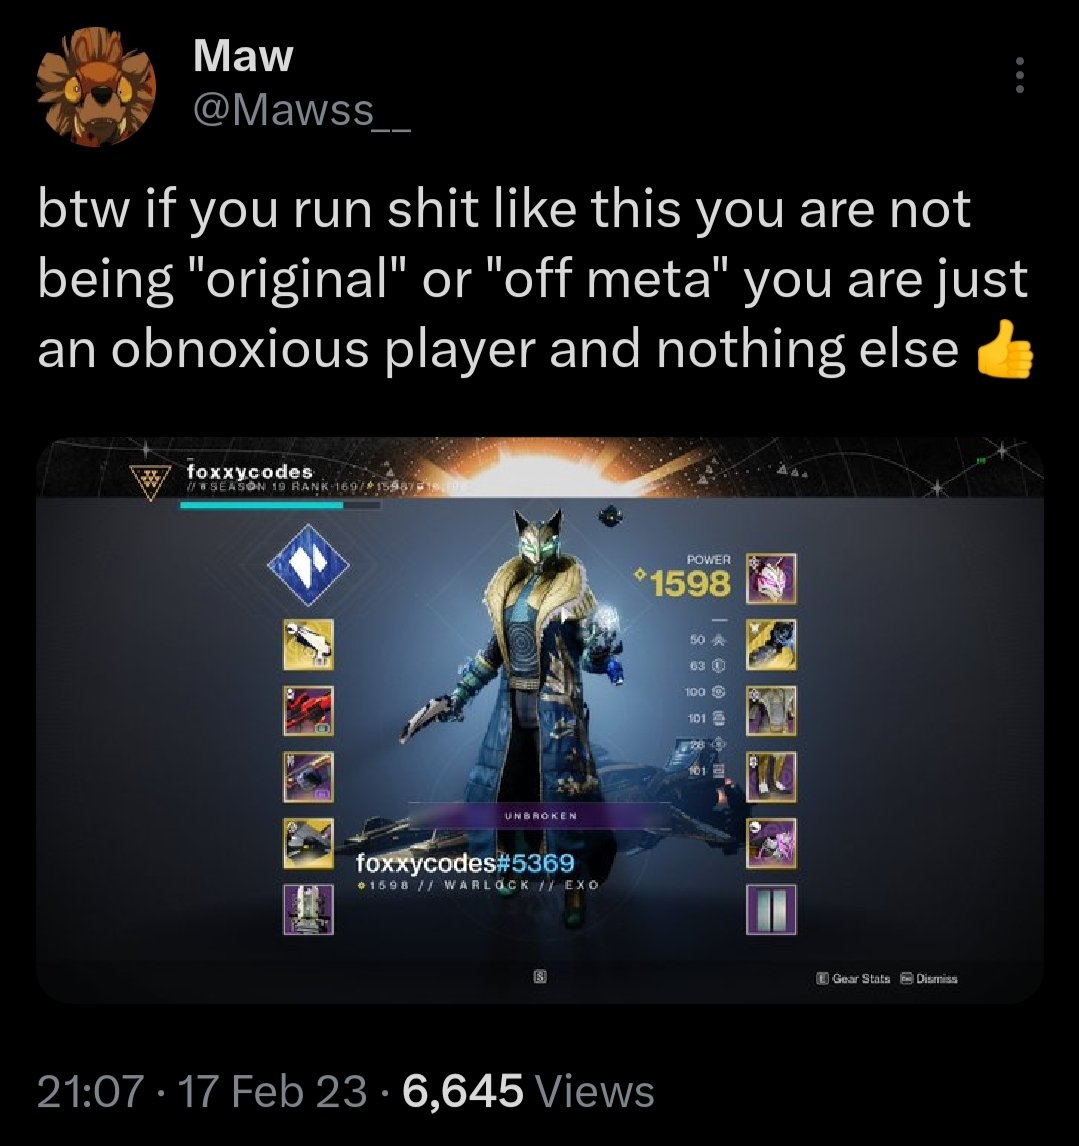 Ah there we are again, taking screenshots of people simply playing pvp to publicly shame them for a loadout in a video game for some clout, grow up and learn to be less miserable. #bebetter